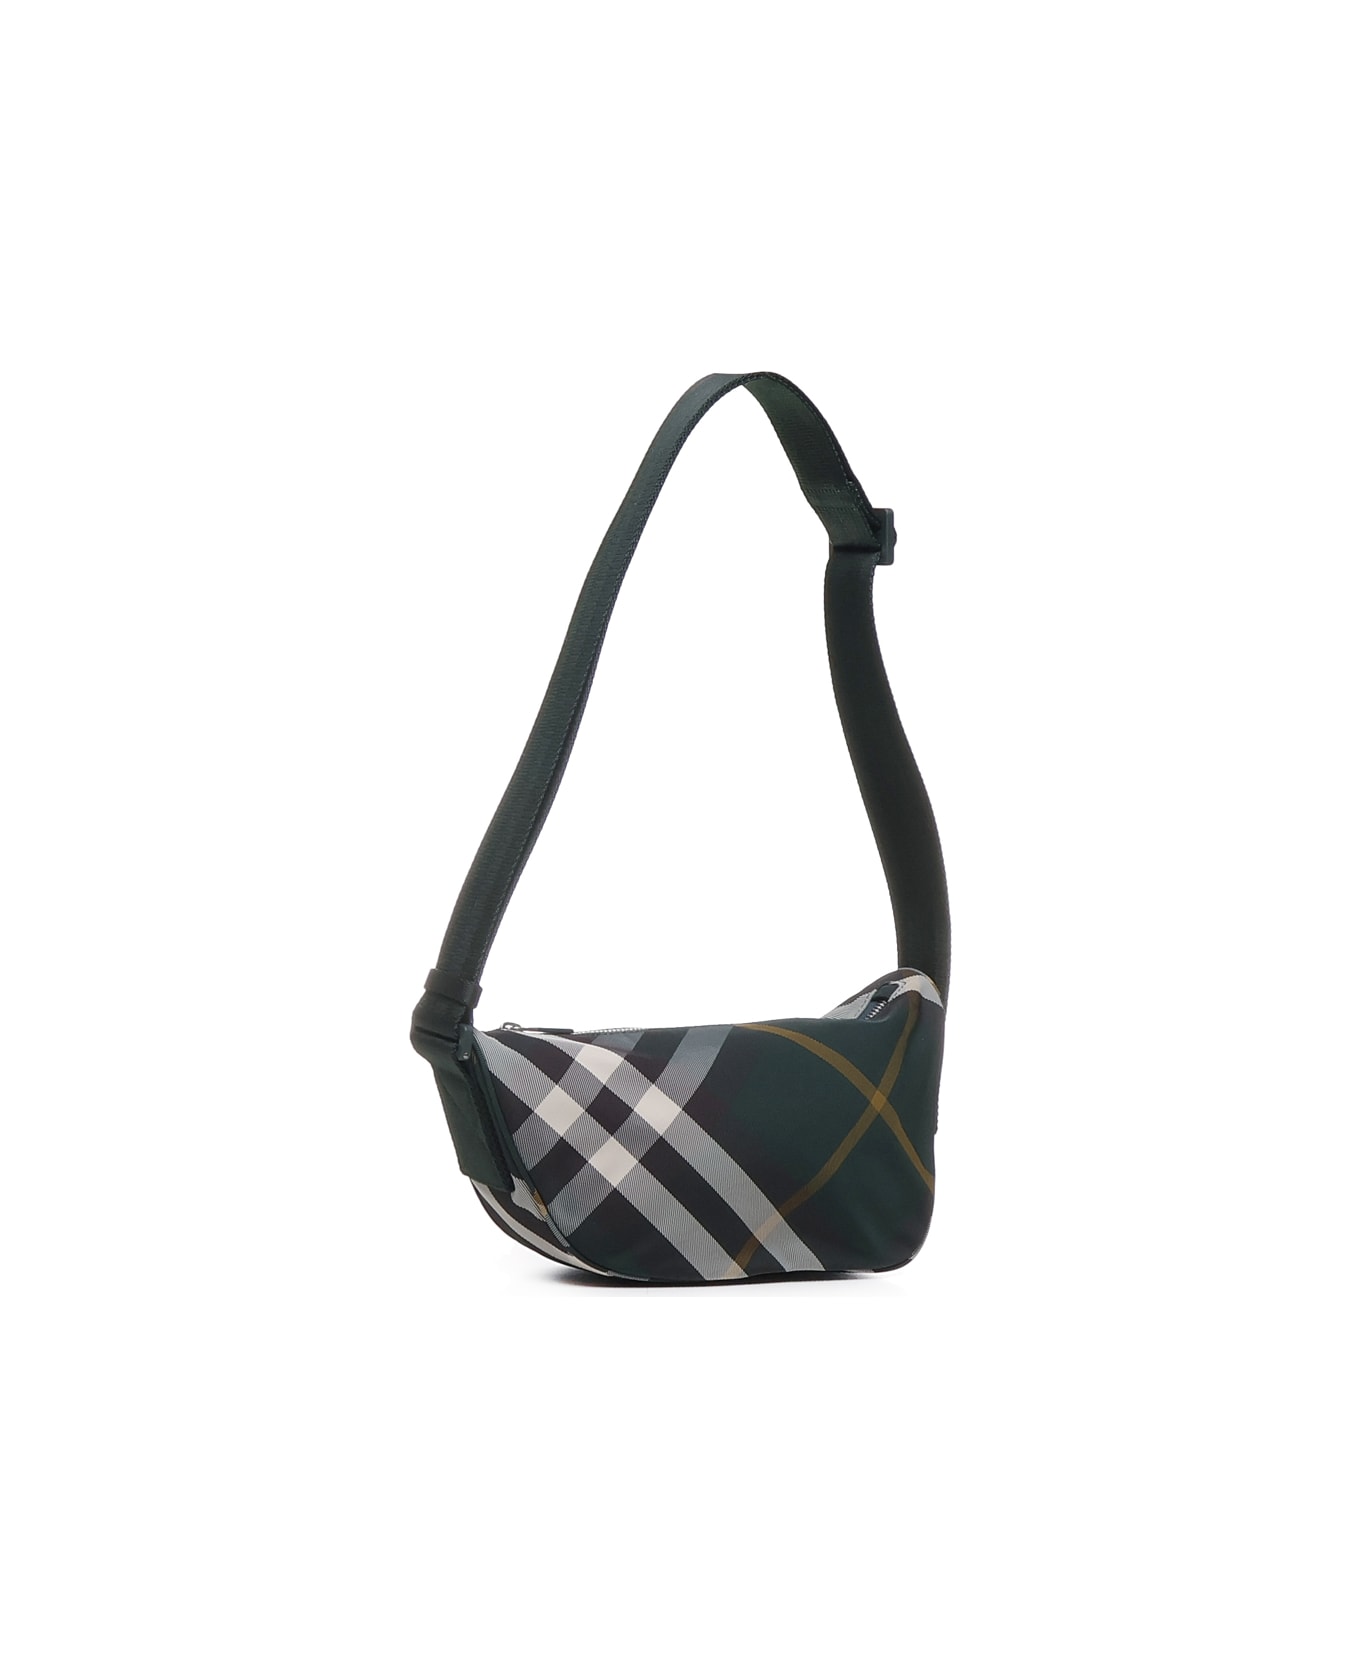 Burberry Check Pouch Bag - GREEN